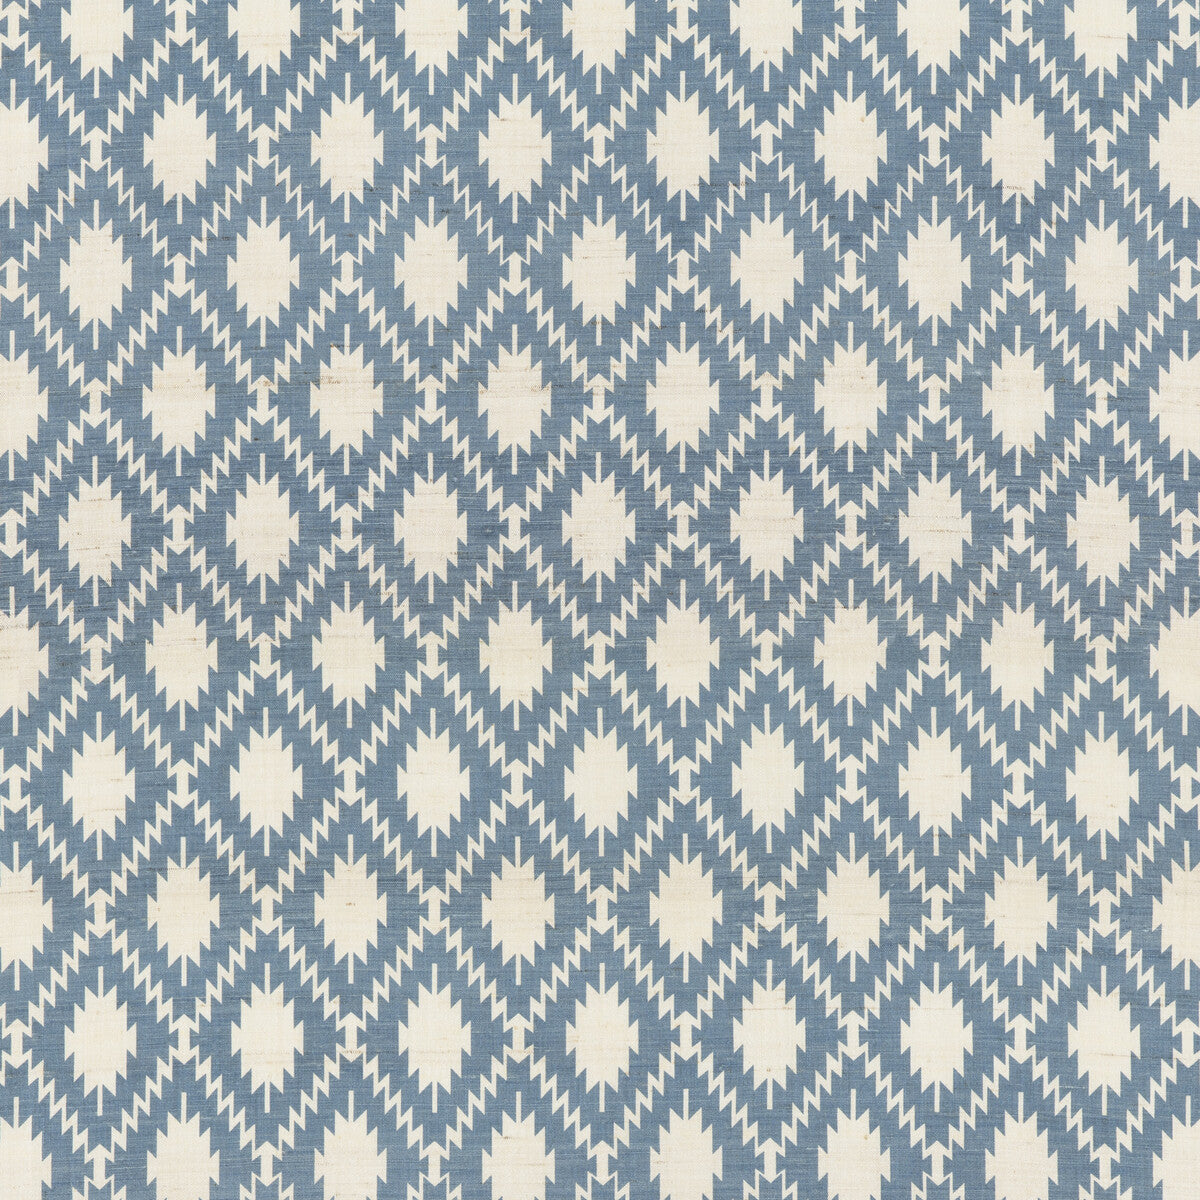 Bagatelle fabric in blue color - pattern BP10908.1.0 - by G P &amp; J Baker in the Portobello collection